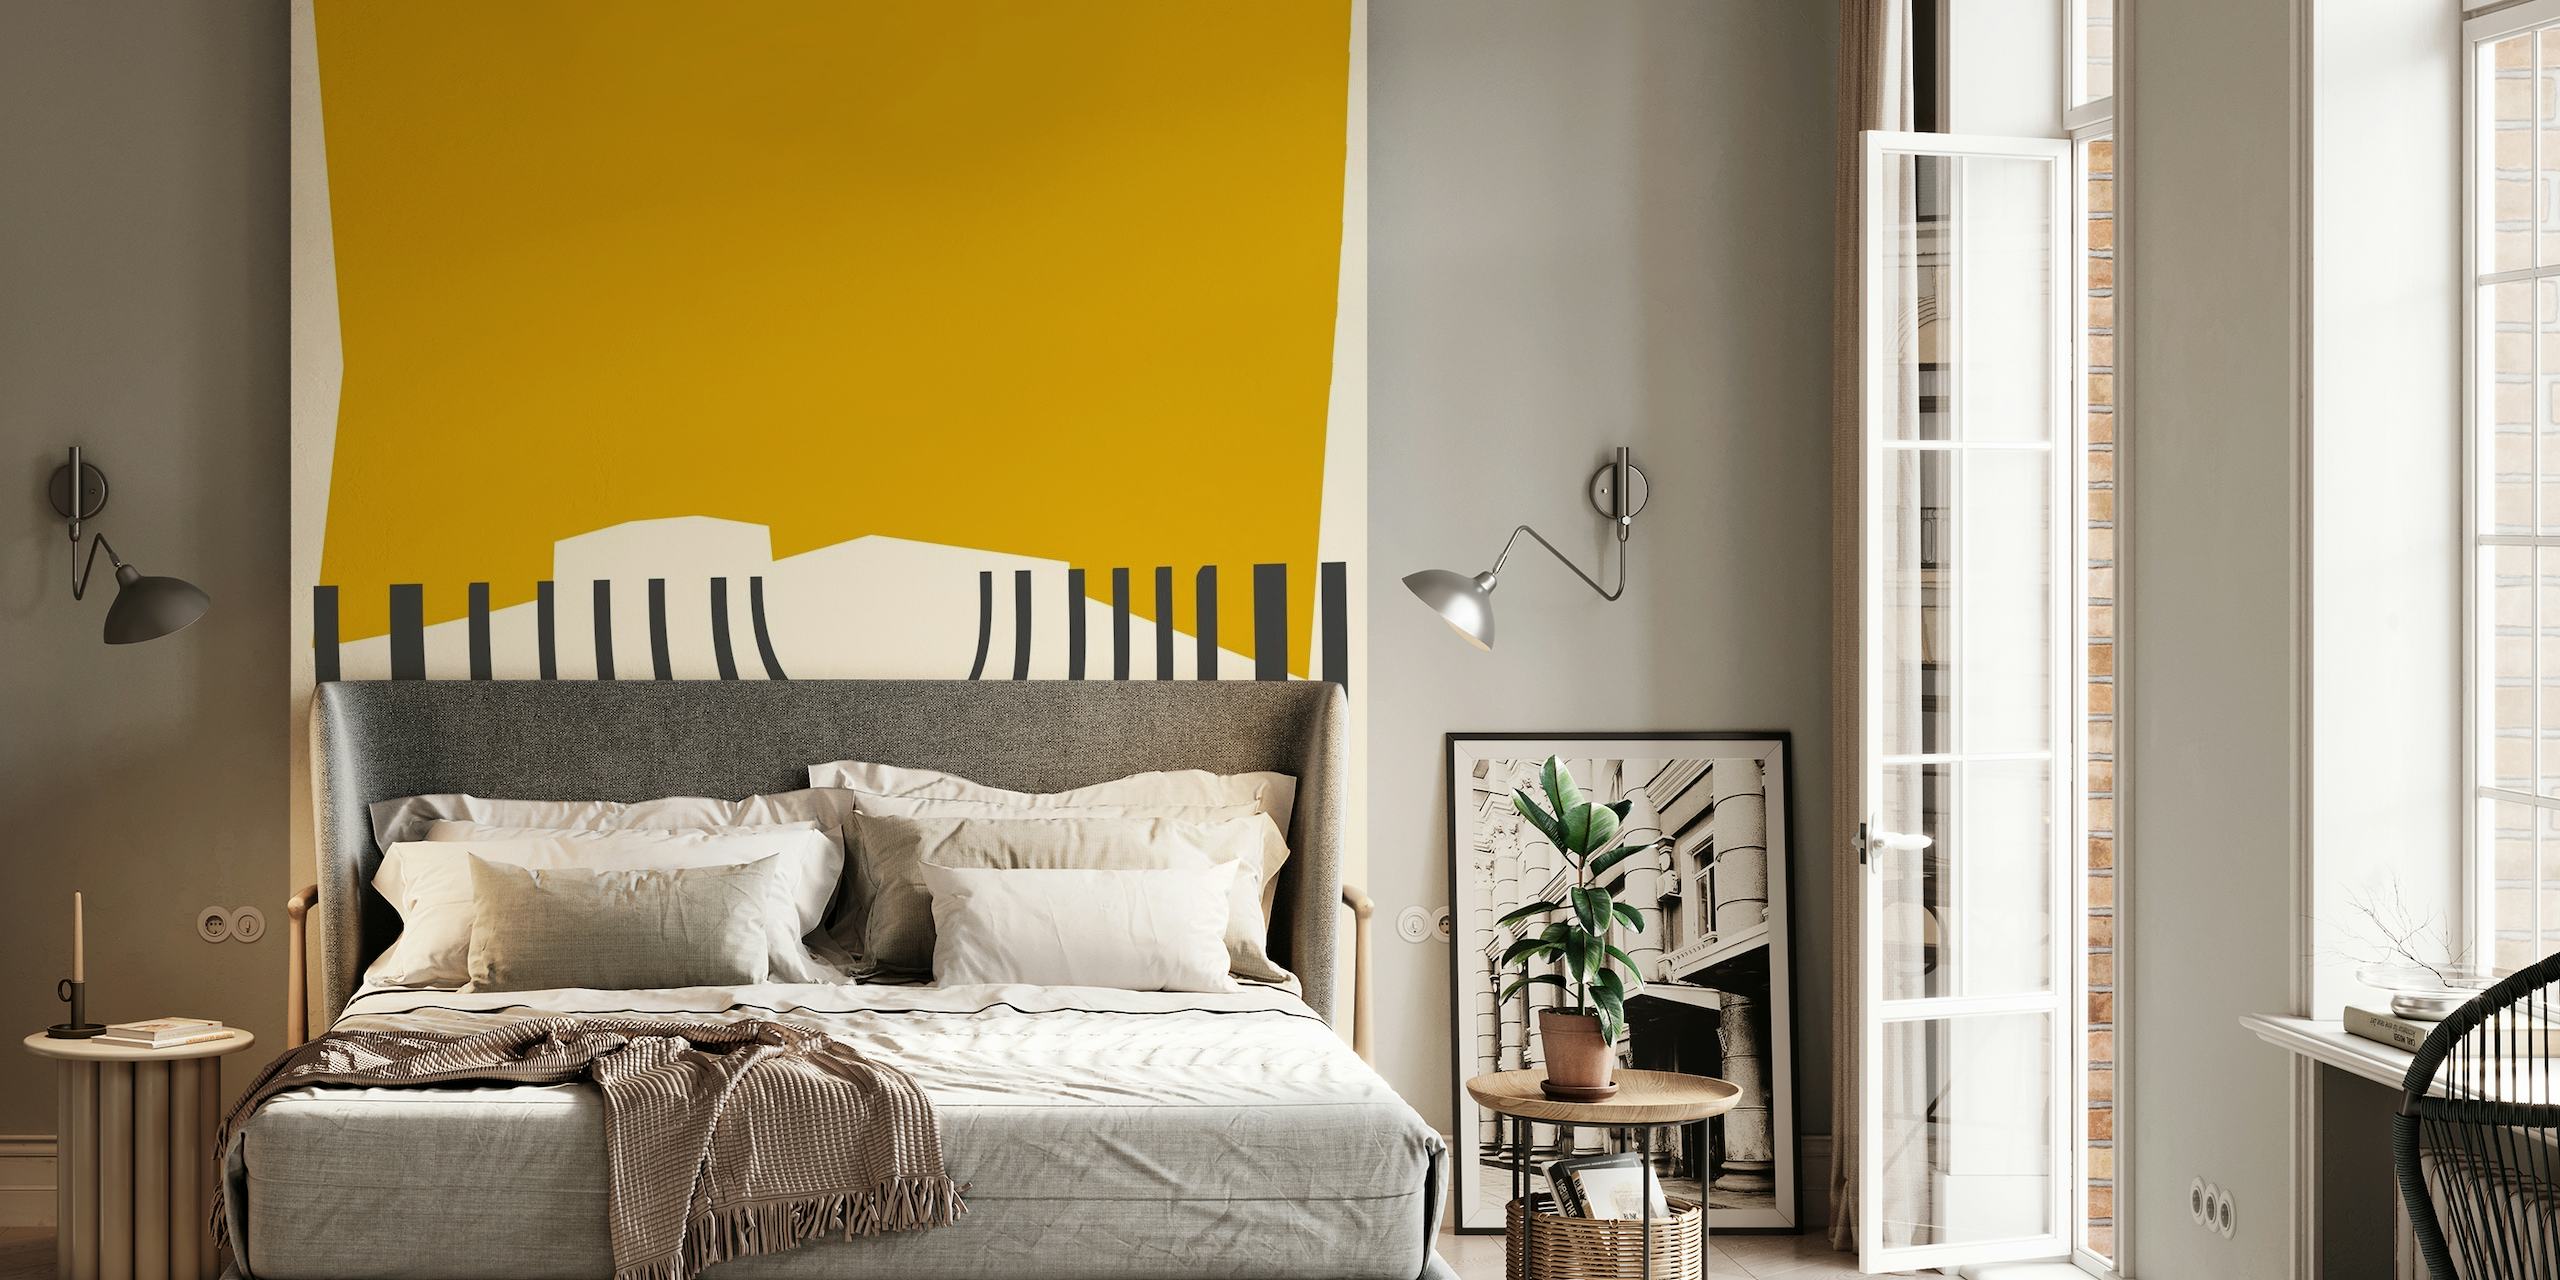 Vintage inspired modernist wall mural featuring abstract geometric shapes and mustard yellow accents